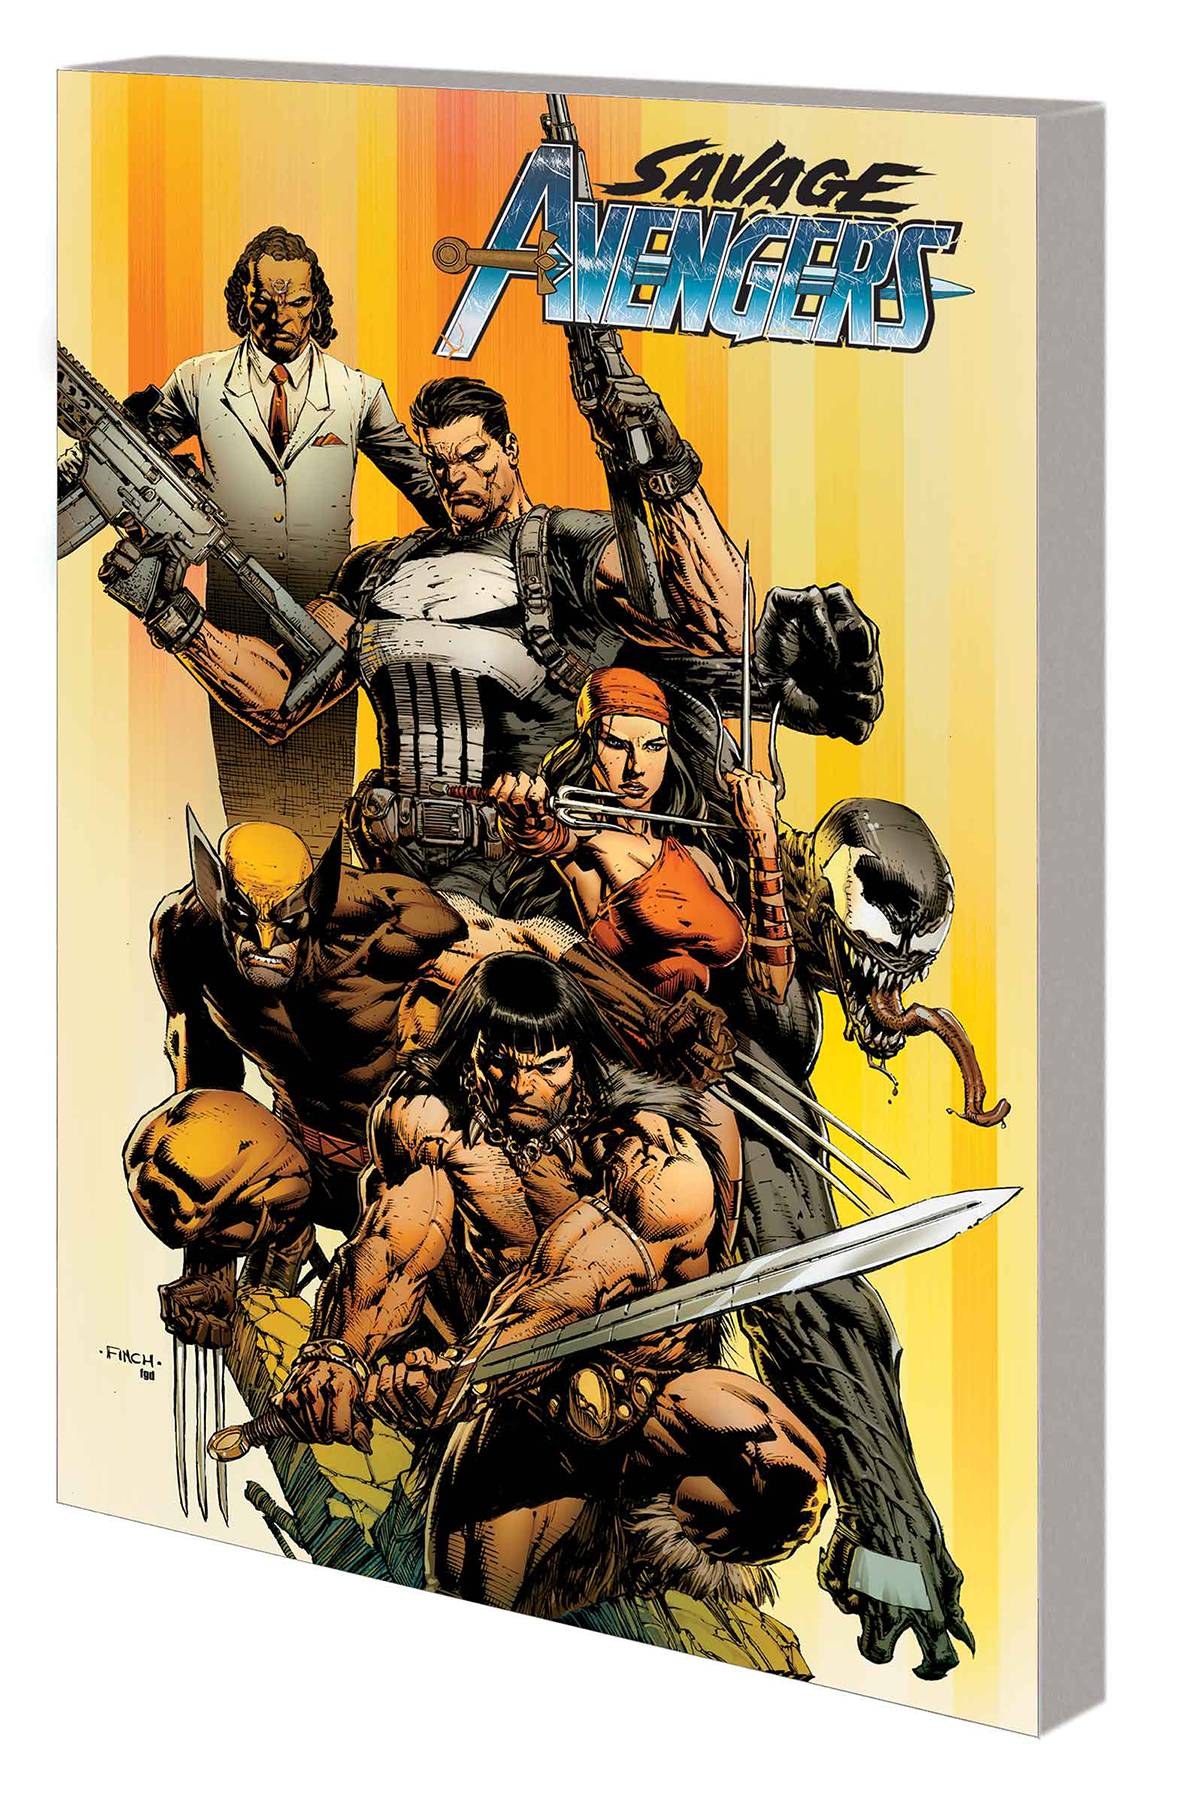 Savage Avengers Graphic Novel Volume 1 City of Sickels